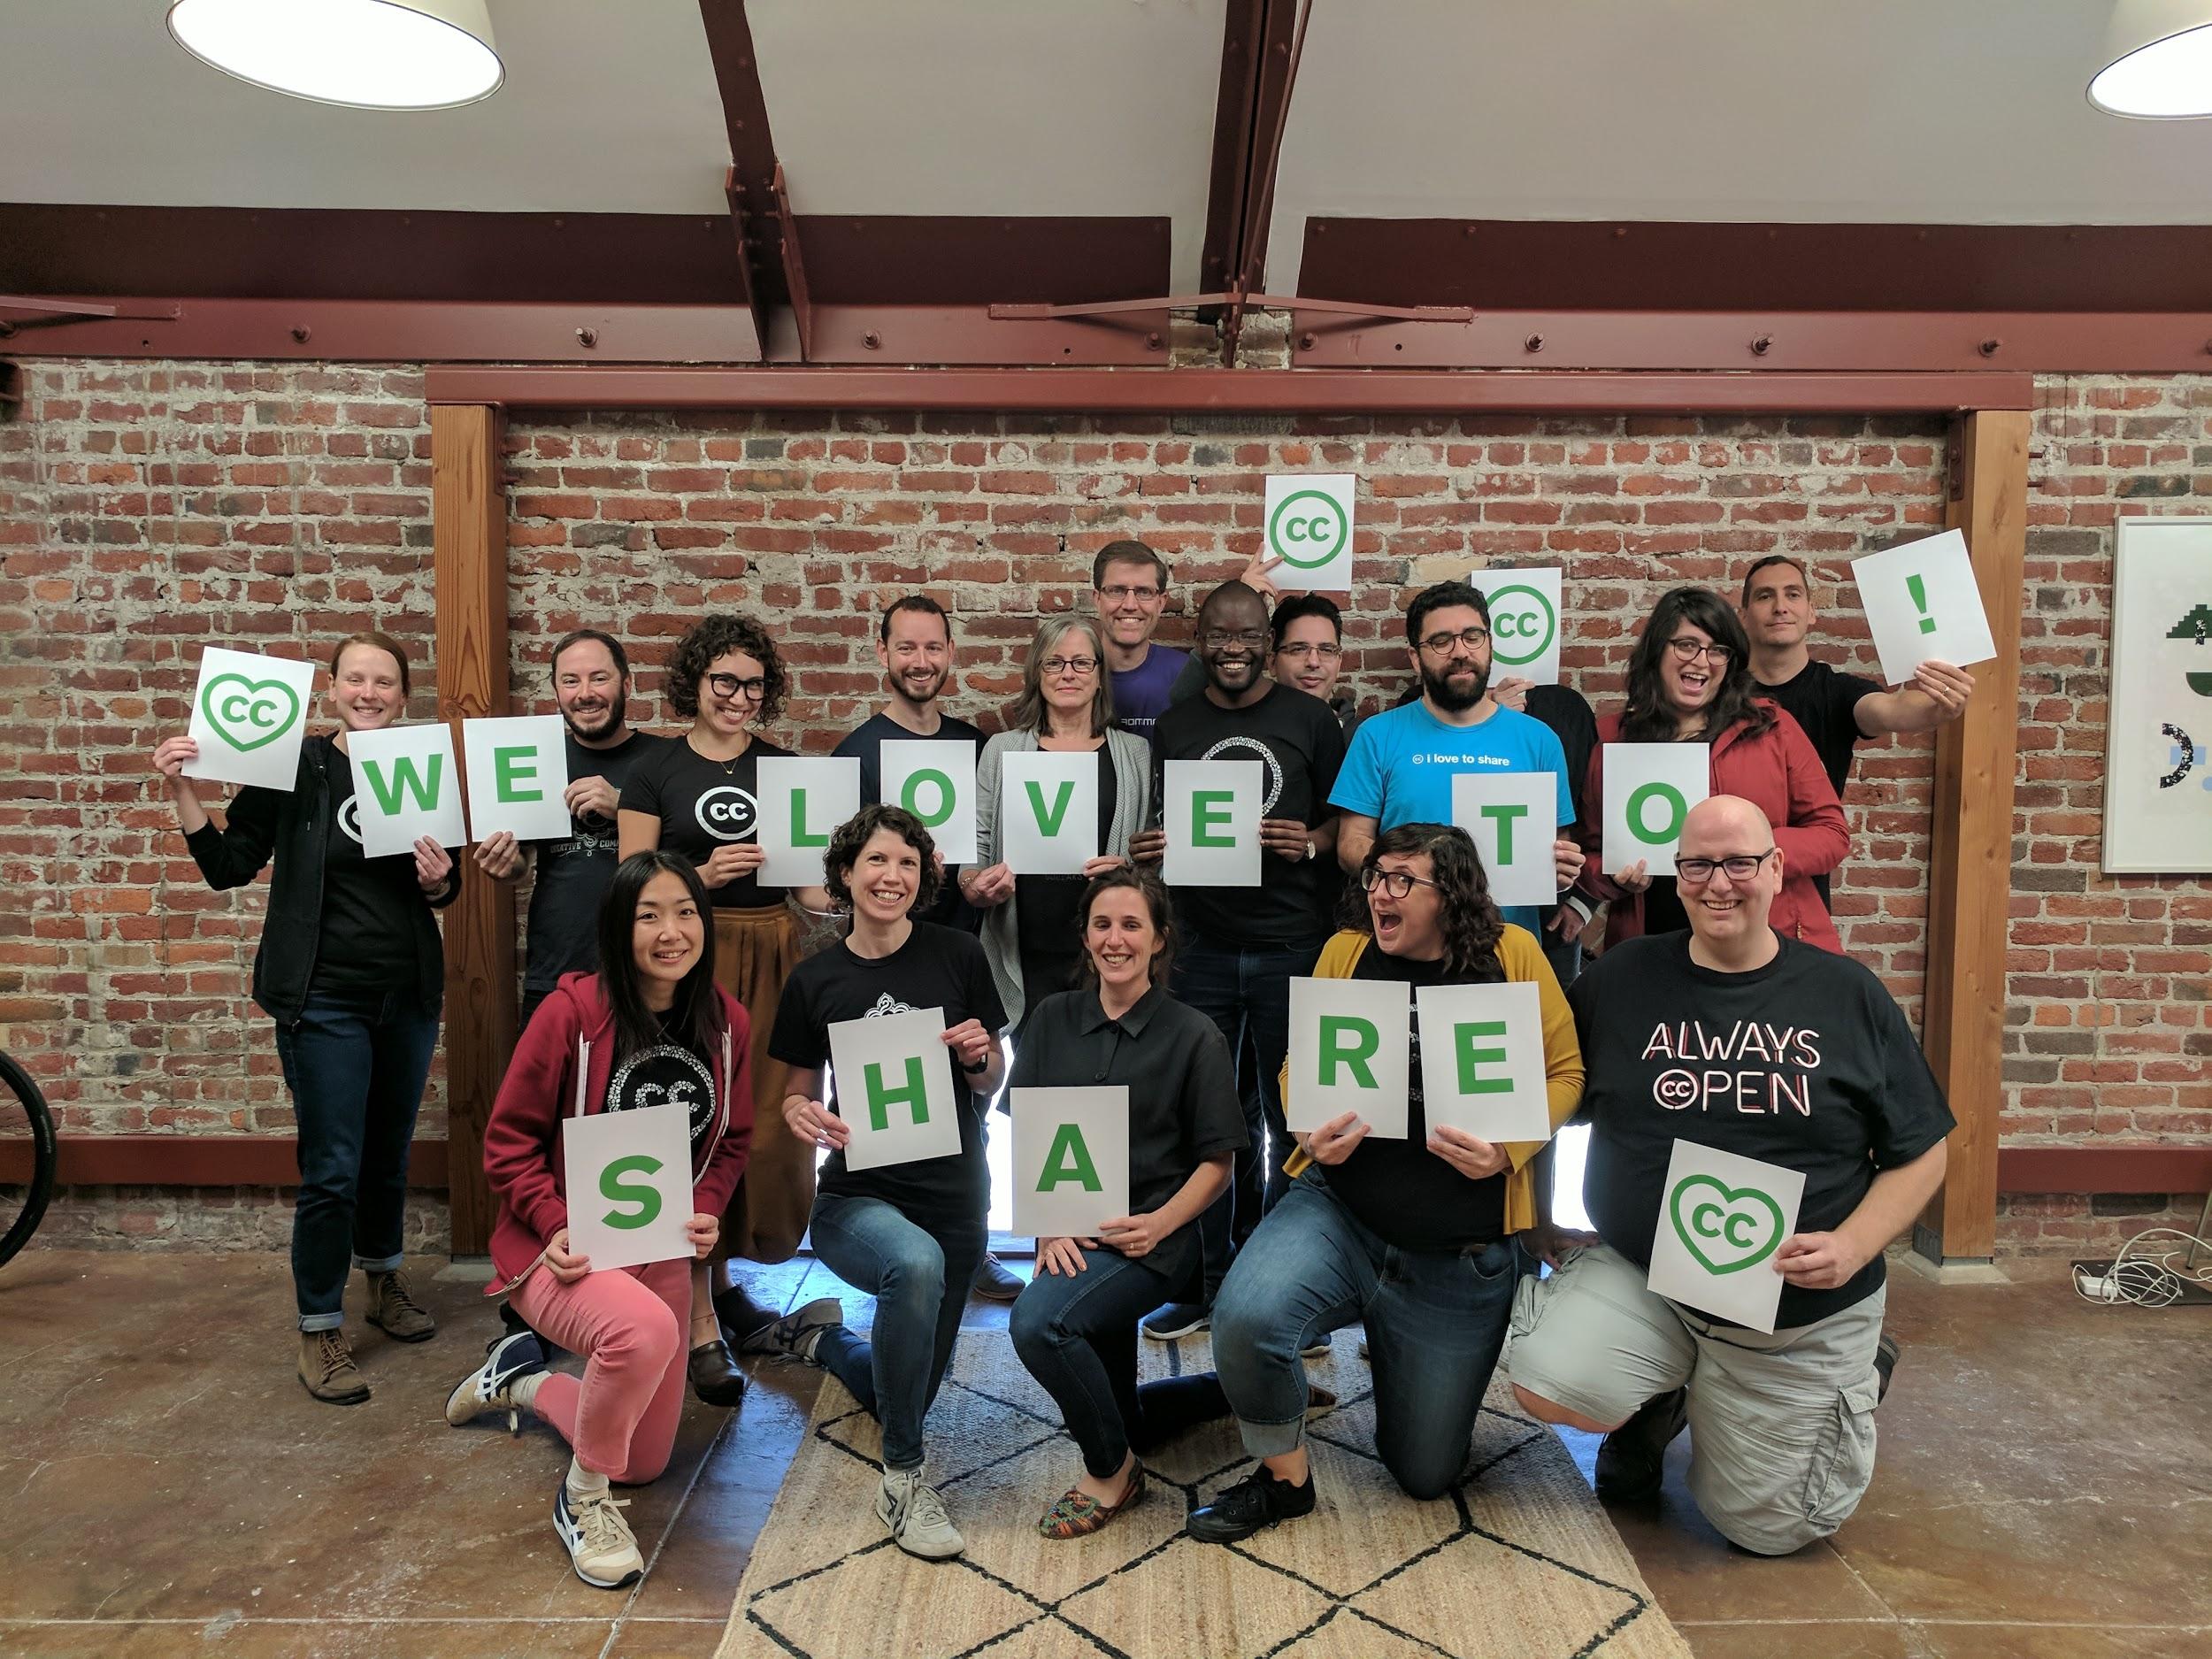 Creative Commons Staff holding signs spelling "We Love To Share"